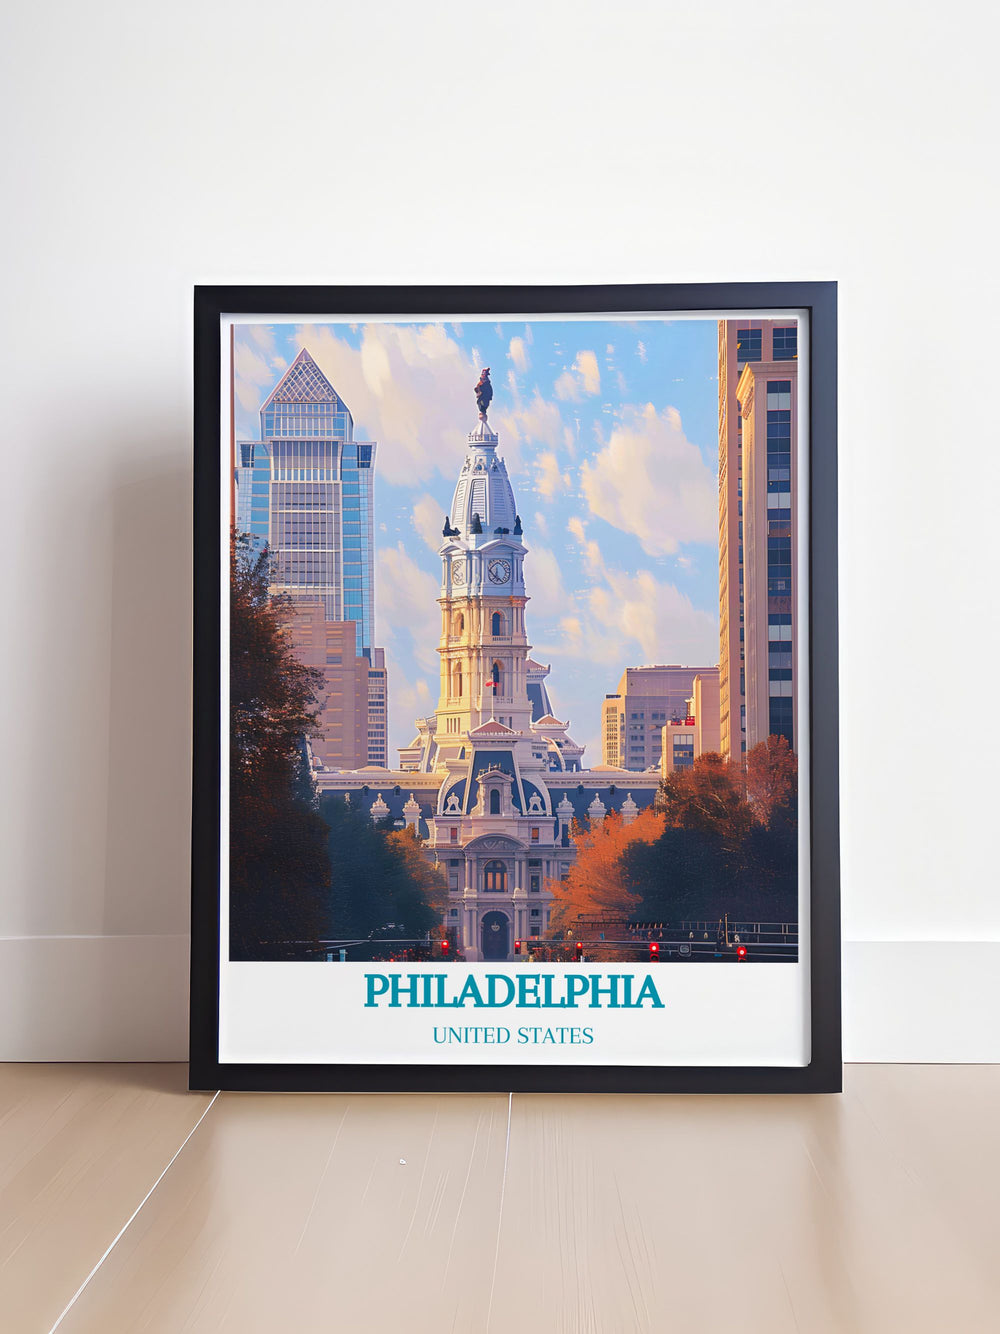 Uncover the stories and events that have shaped Philadelphia City Hall with this art print, depicting its architectural beauty and cultural heritage.